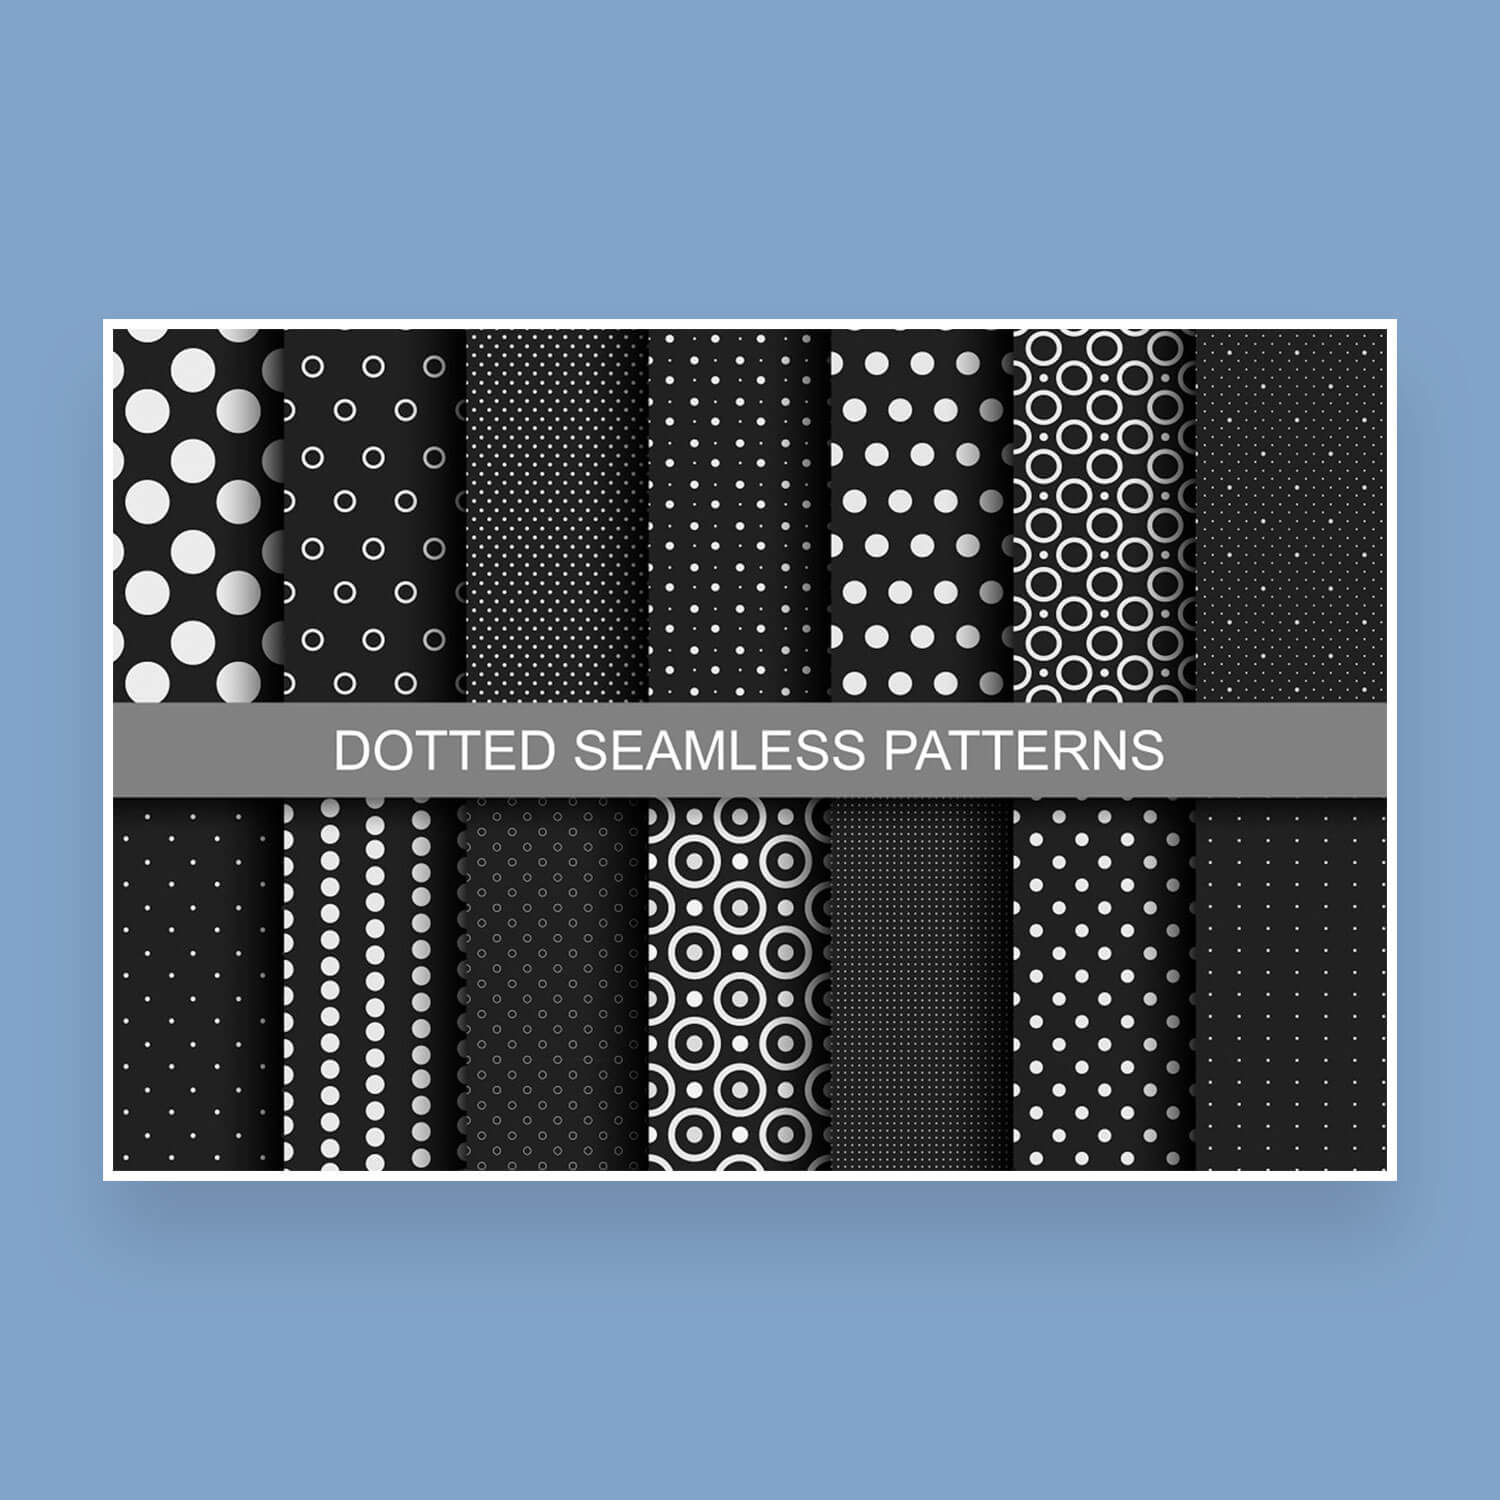 All kinds of dotted seamless patterns.